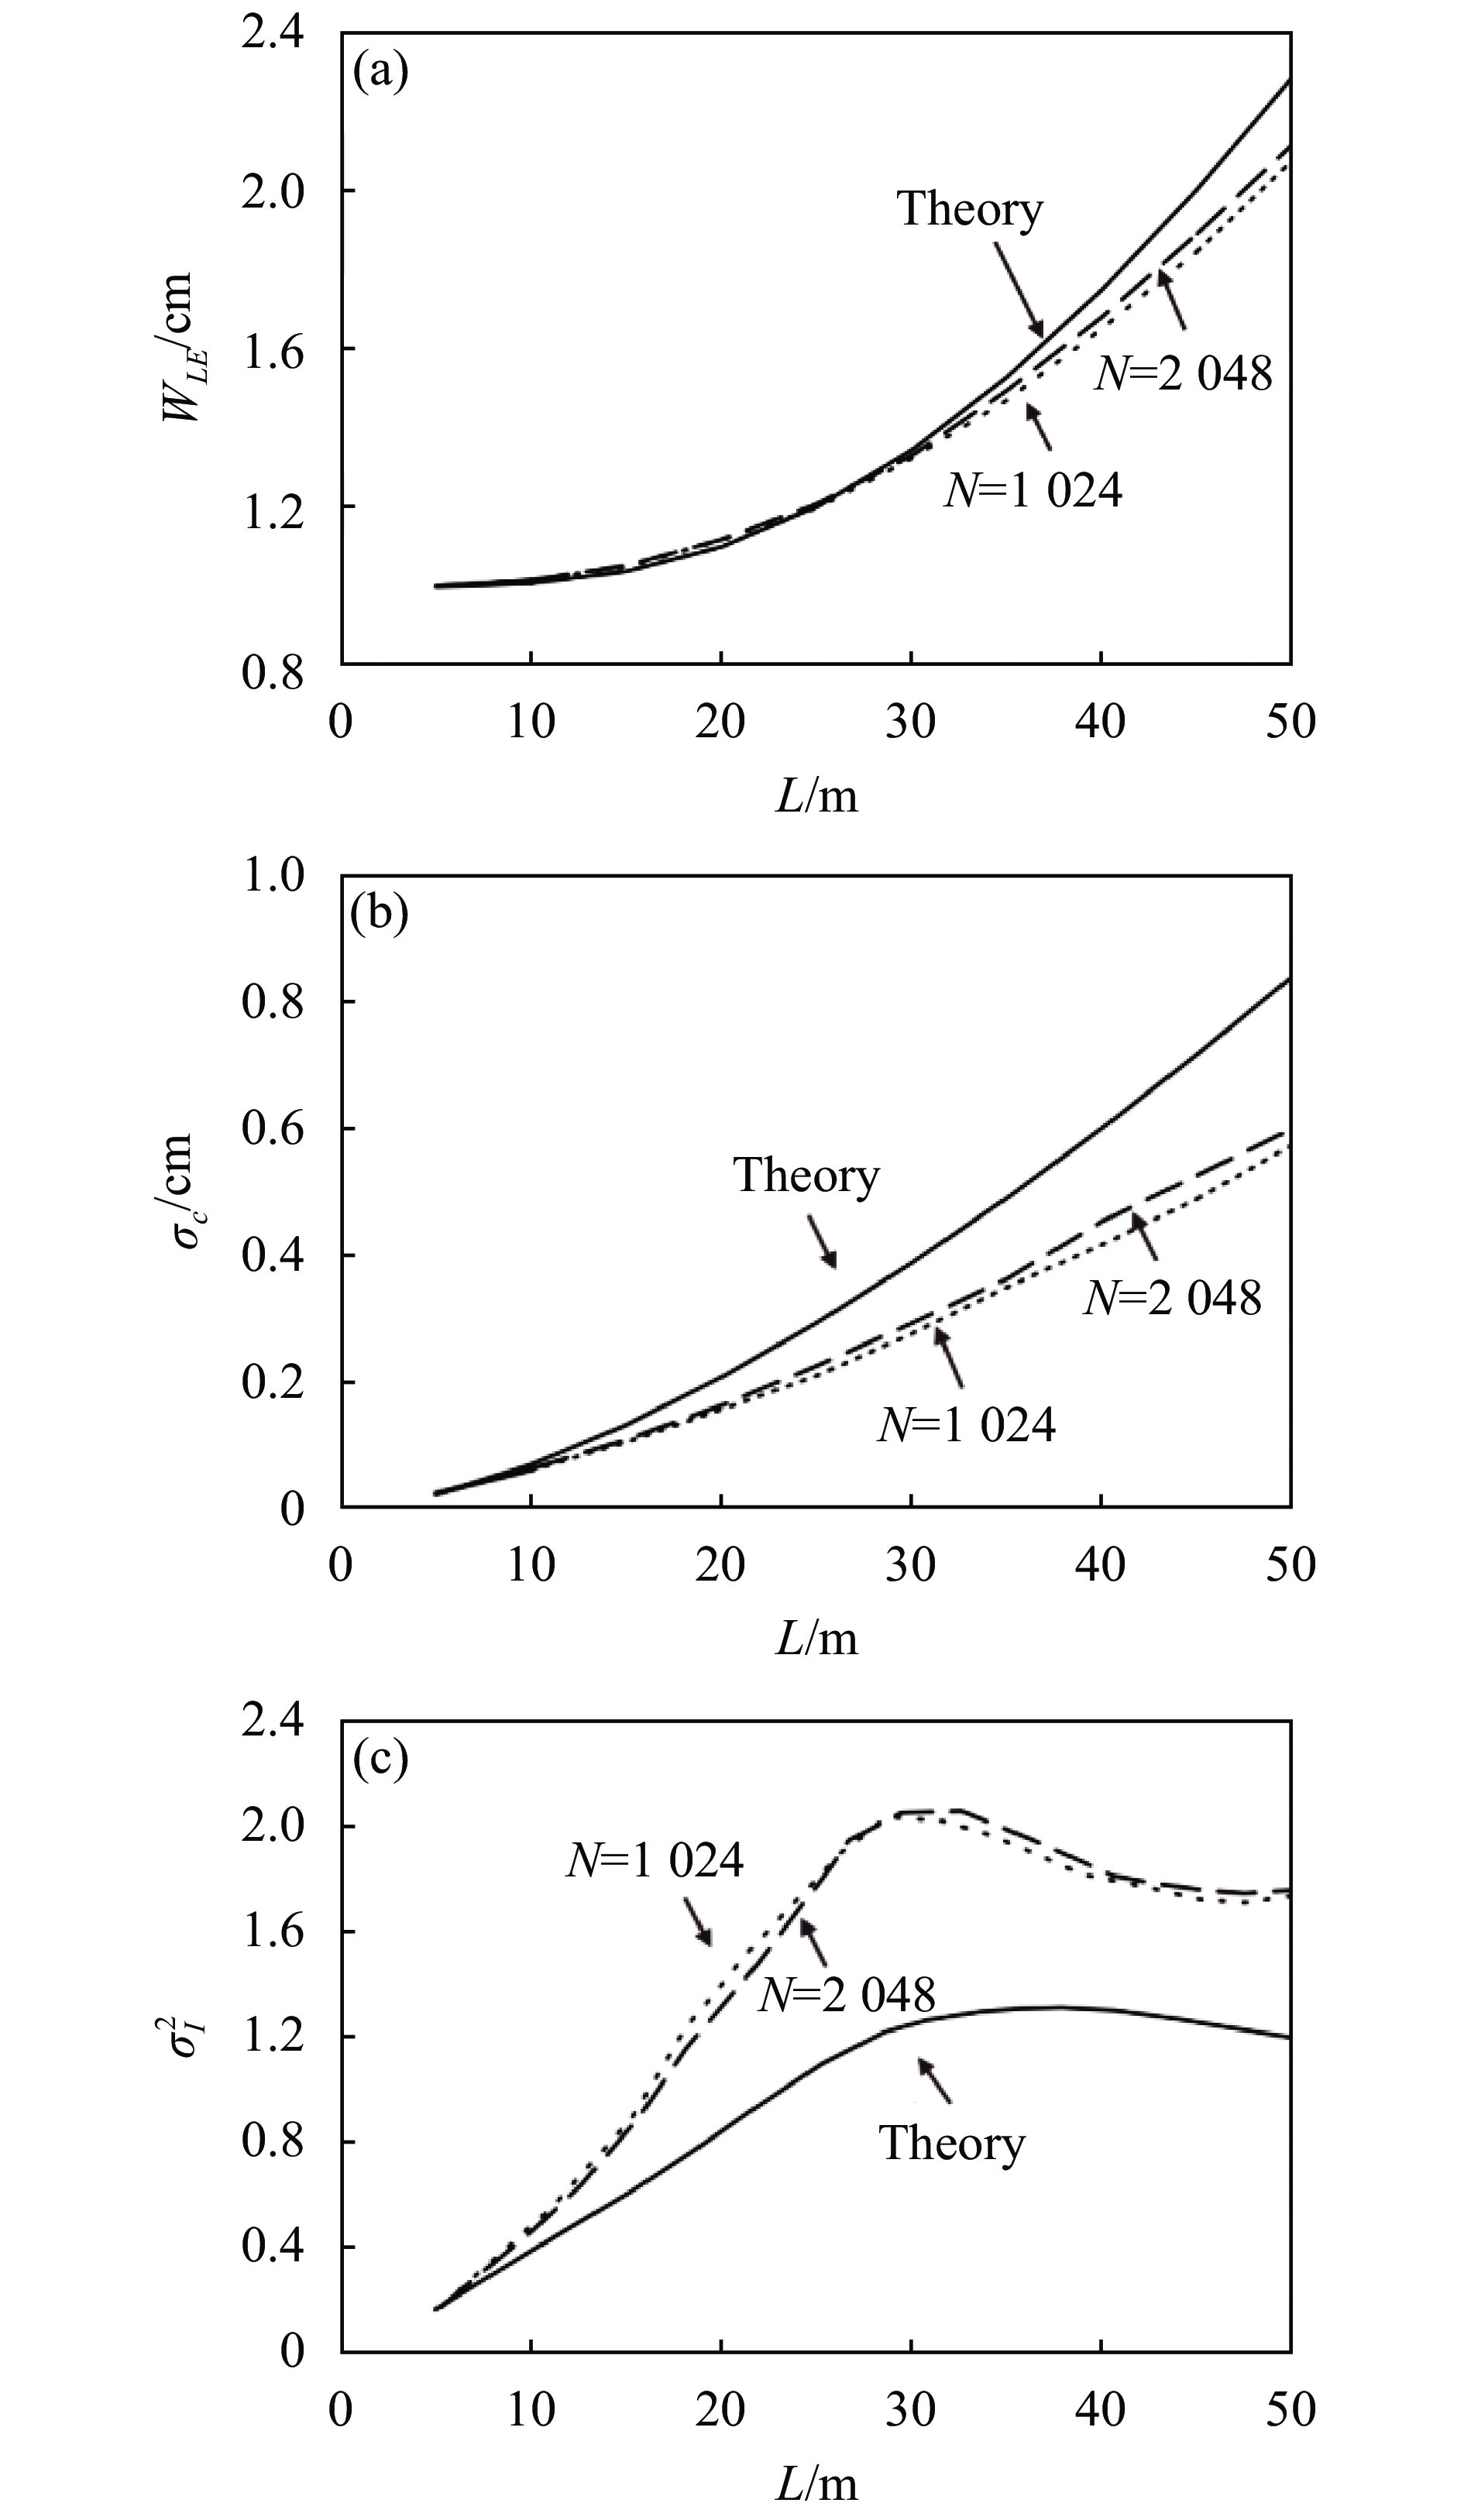 Propagation characteristics versus different propagation distance, (a) long-exposure beam radius WLE, (b) beam centroid displacement , (c) on-axis scintillation index